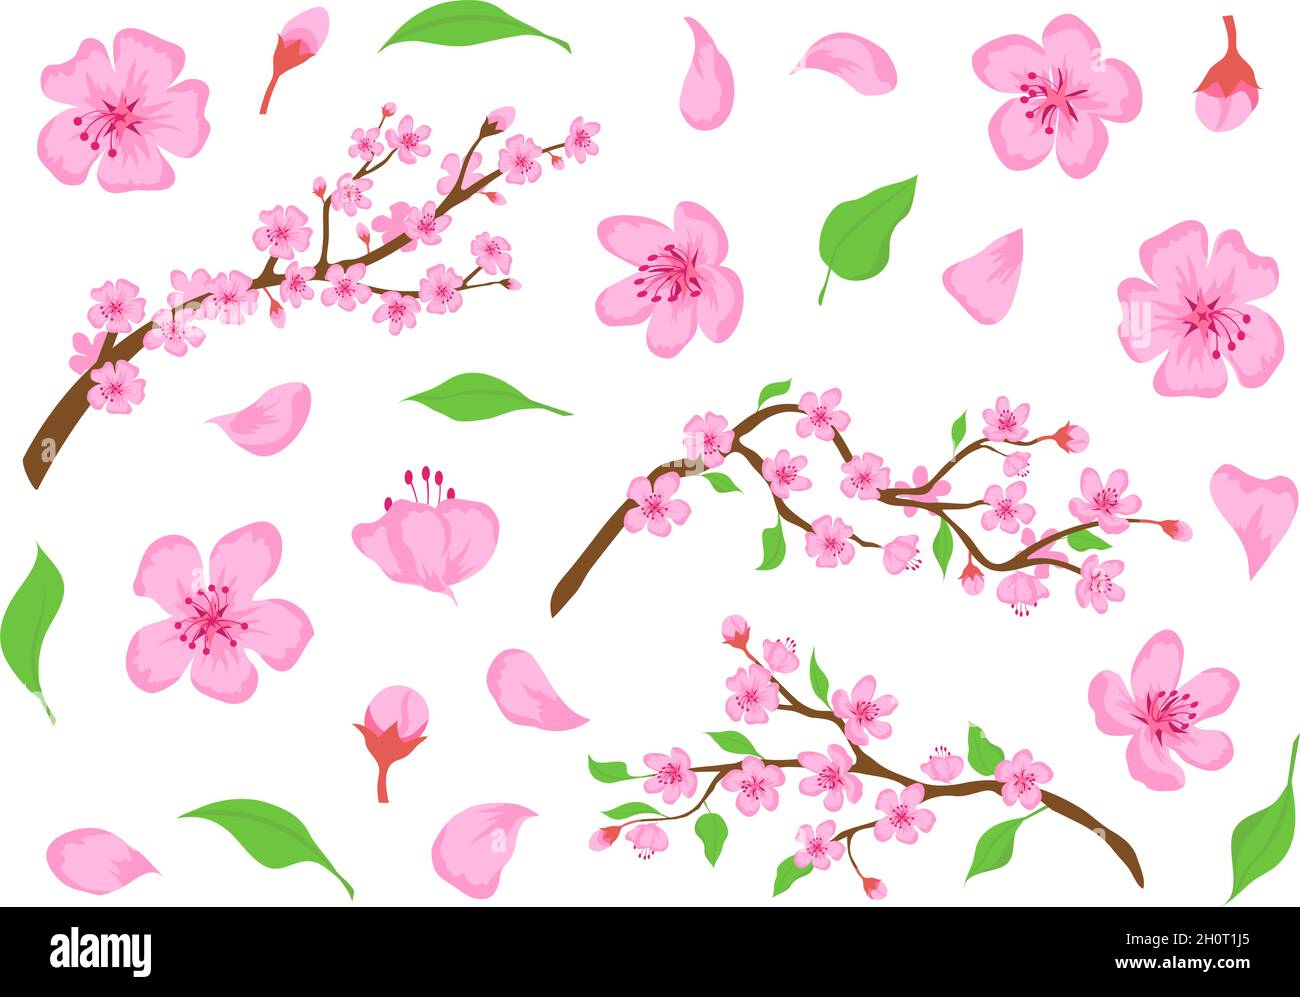 Blossom sakura pink flowers, buds, leaves and tree branches. Spring japanese cherry floral elements. Apple or peach bloom flower vector set Stock Vector